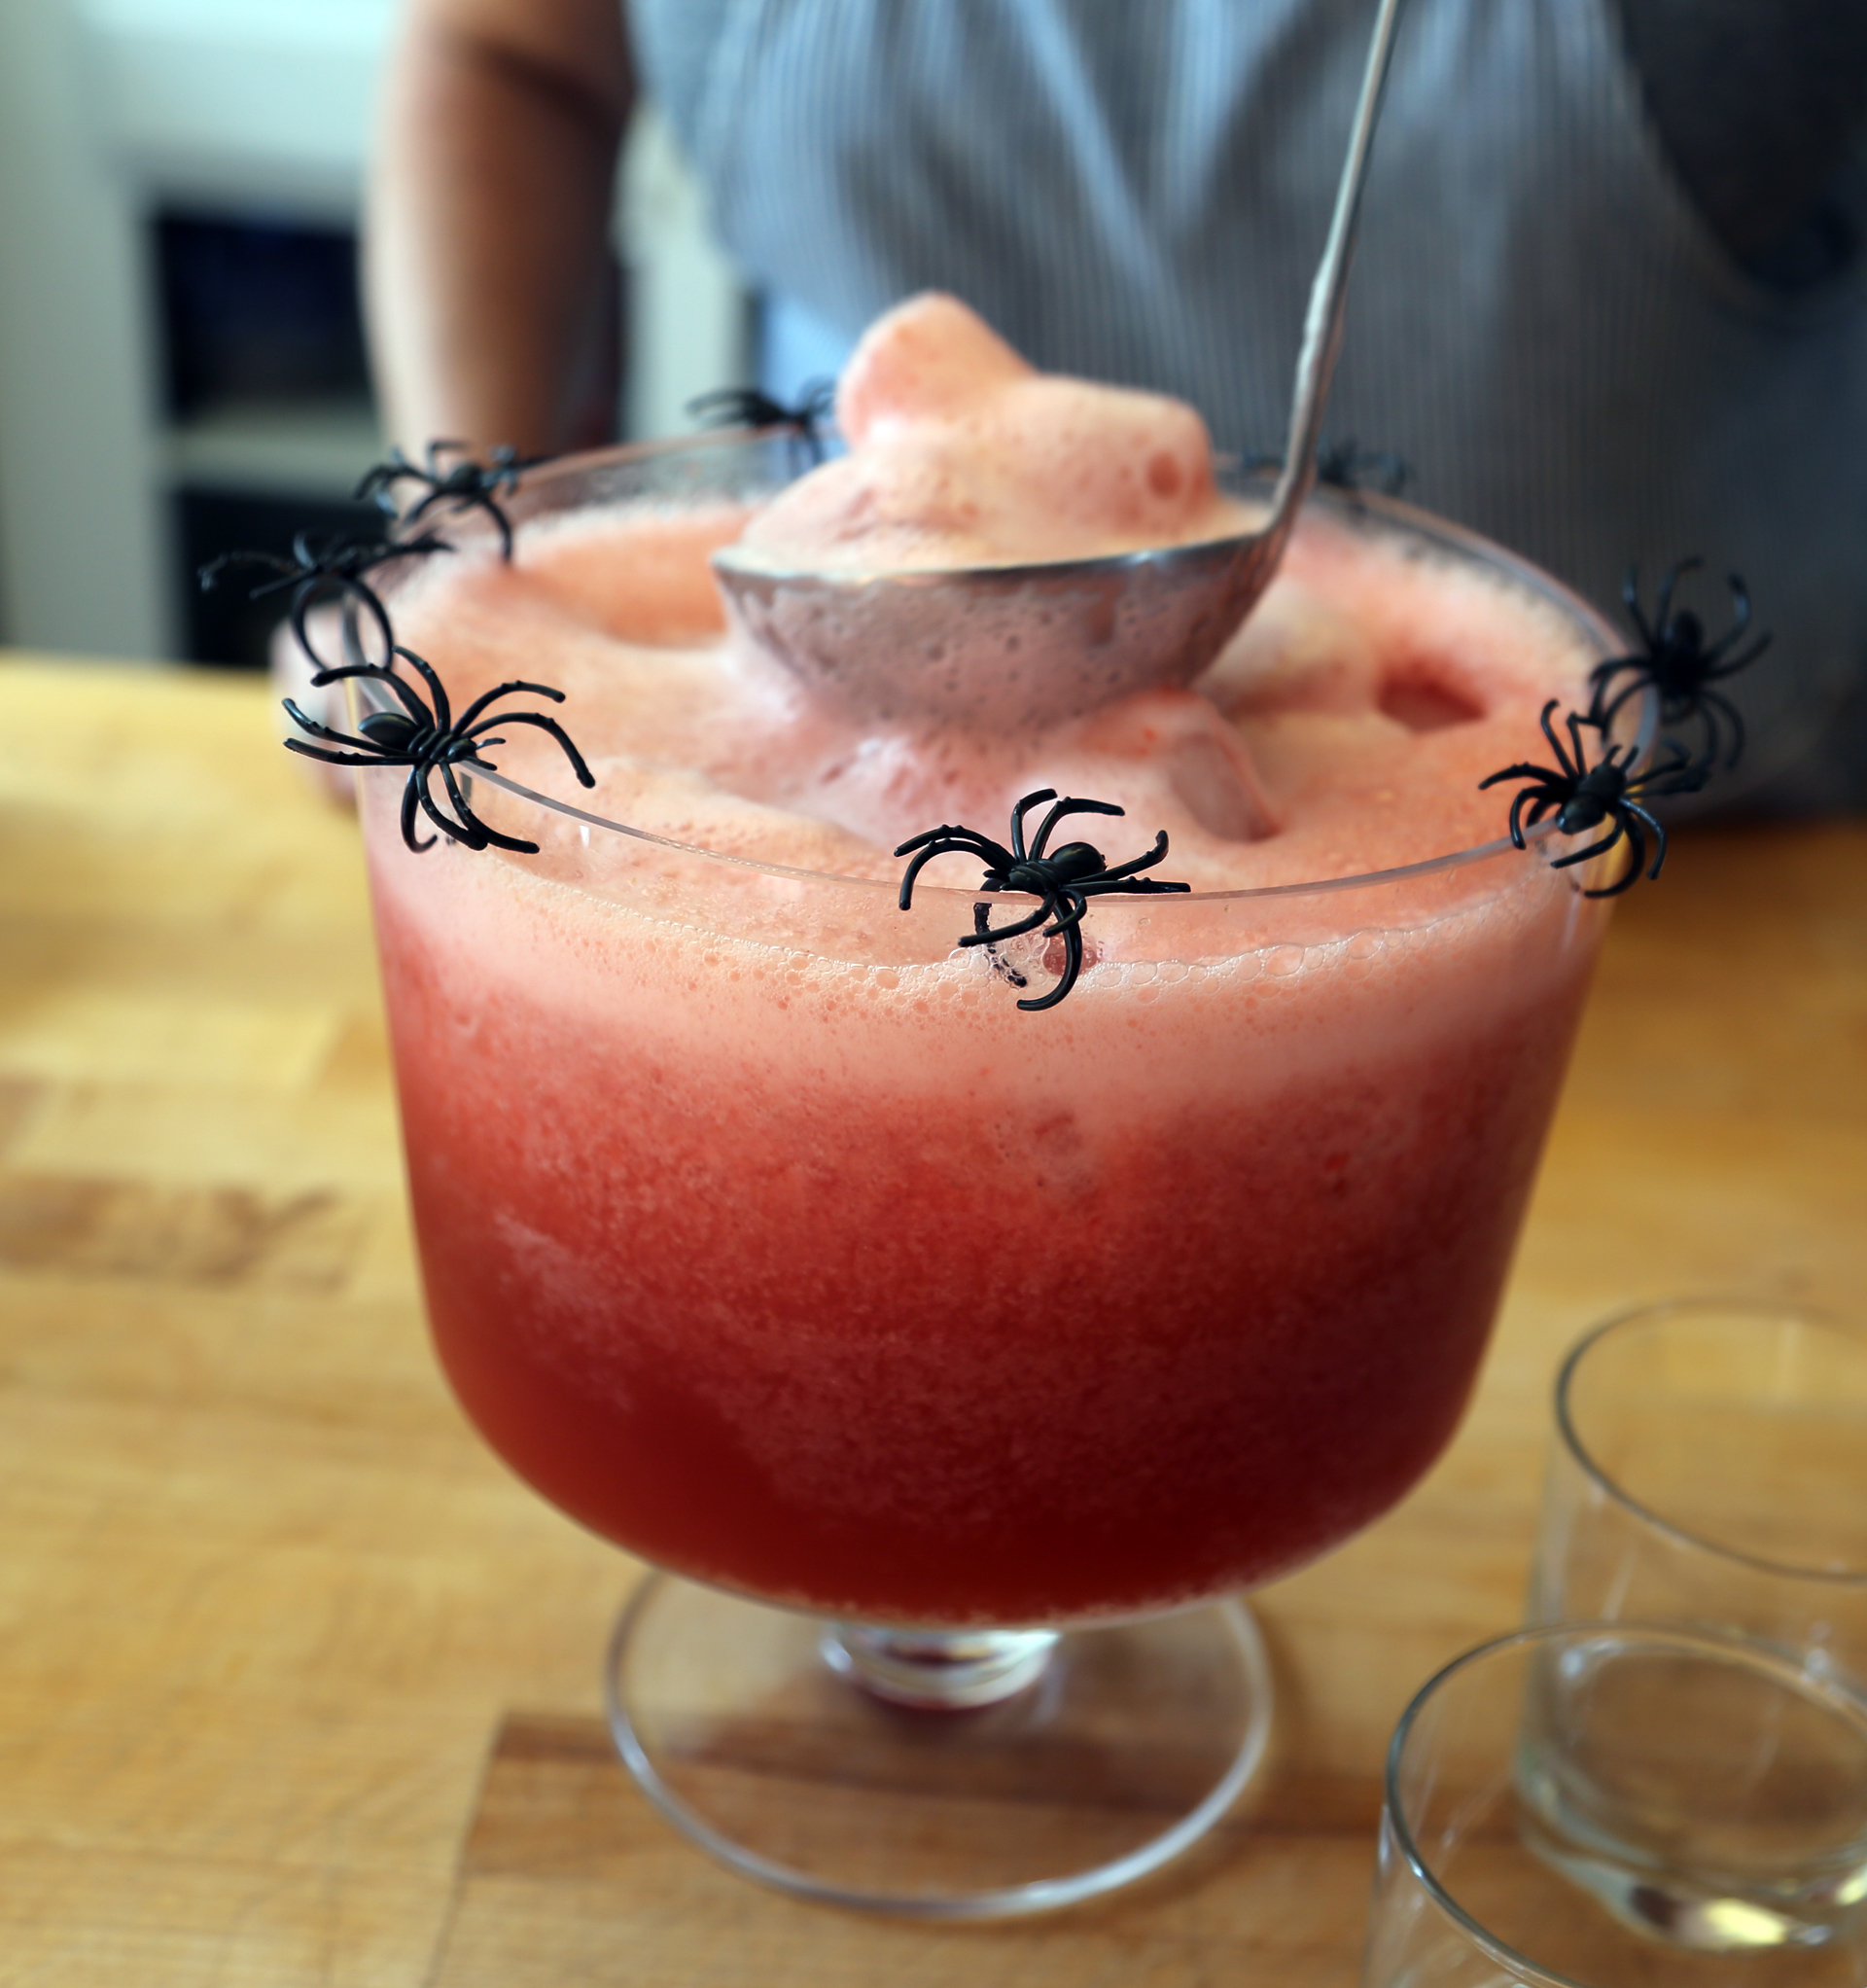 Add the ice cubes and garnish the bowl with terrifying creatures of the night.